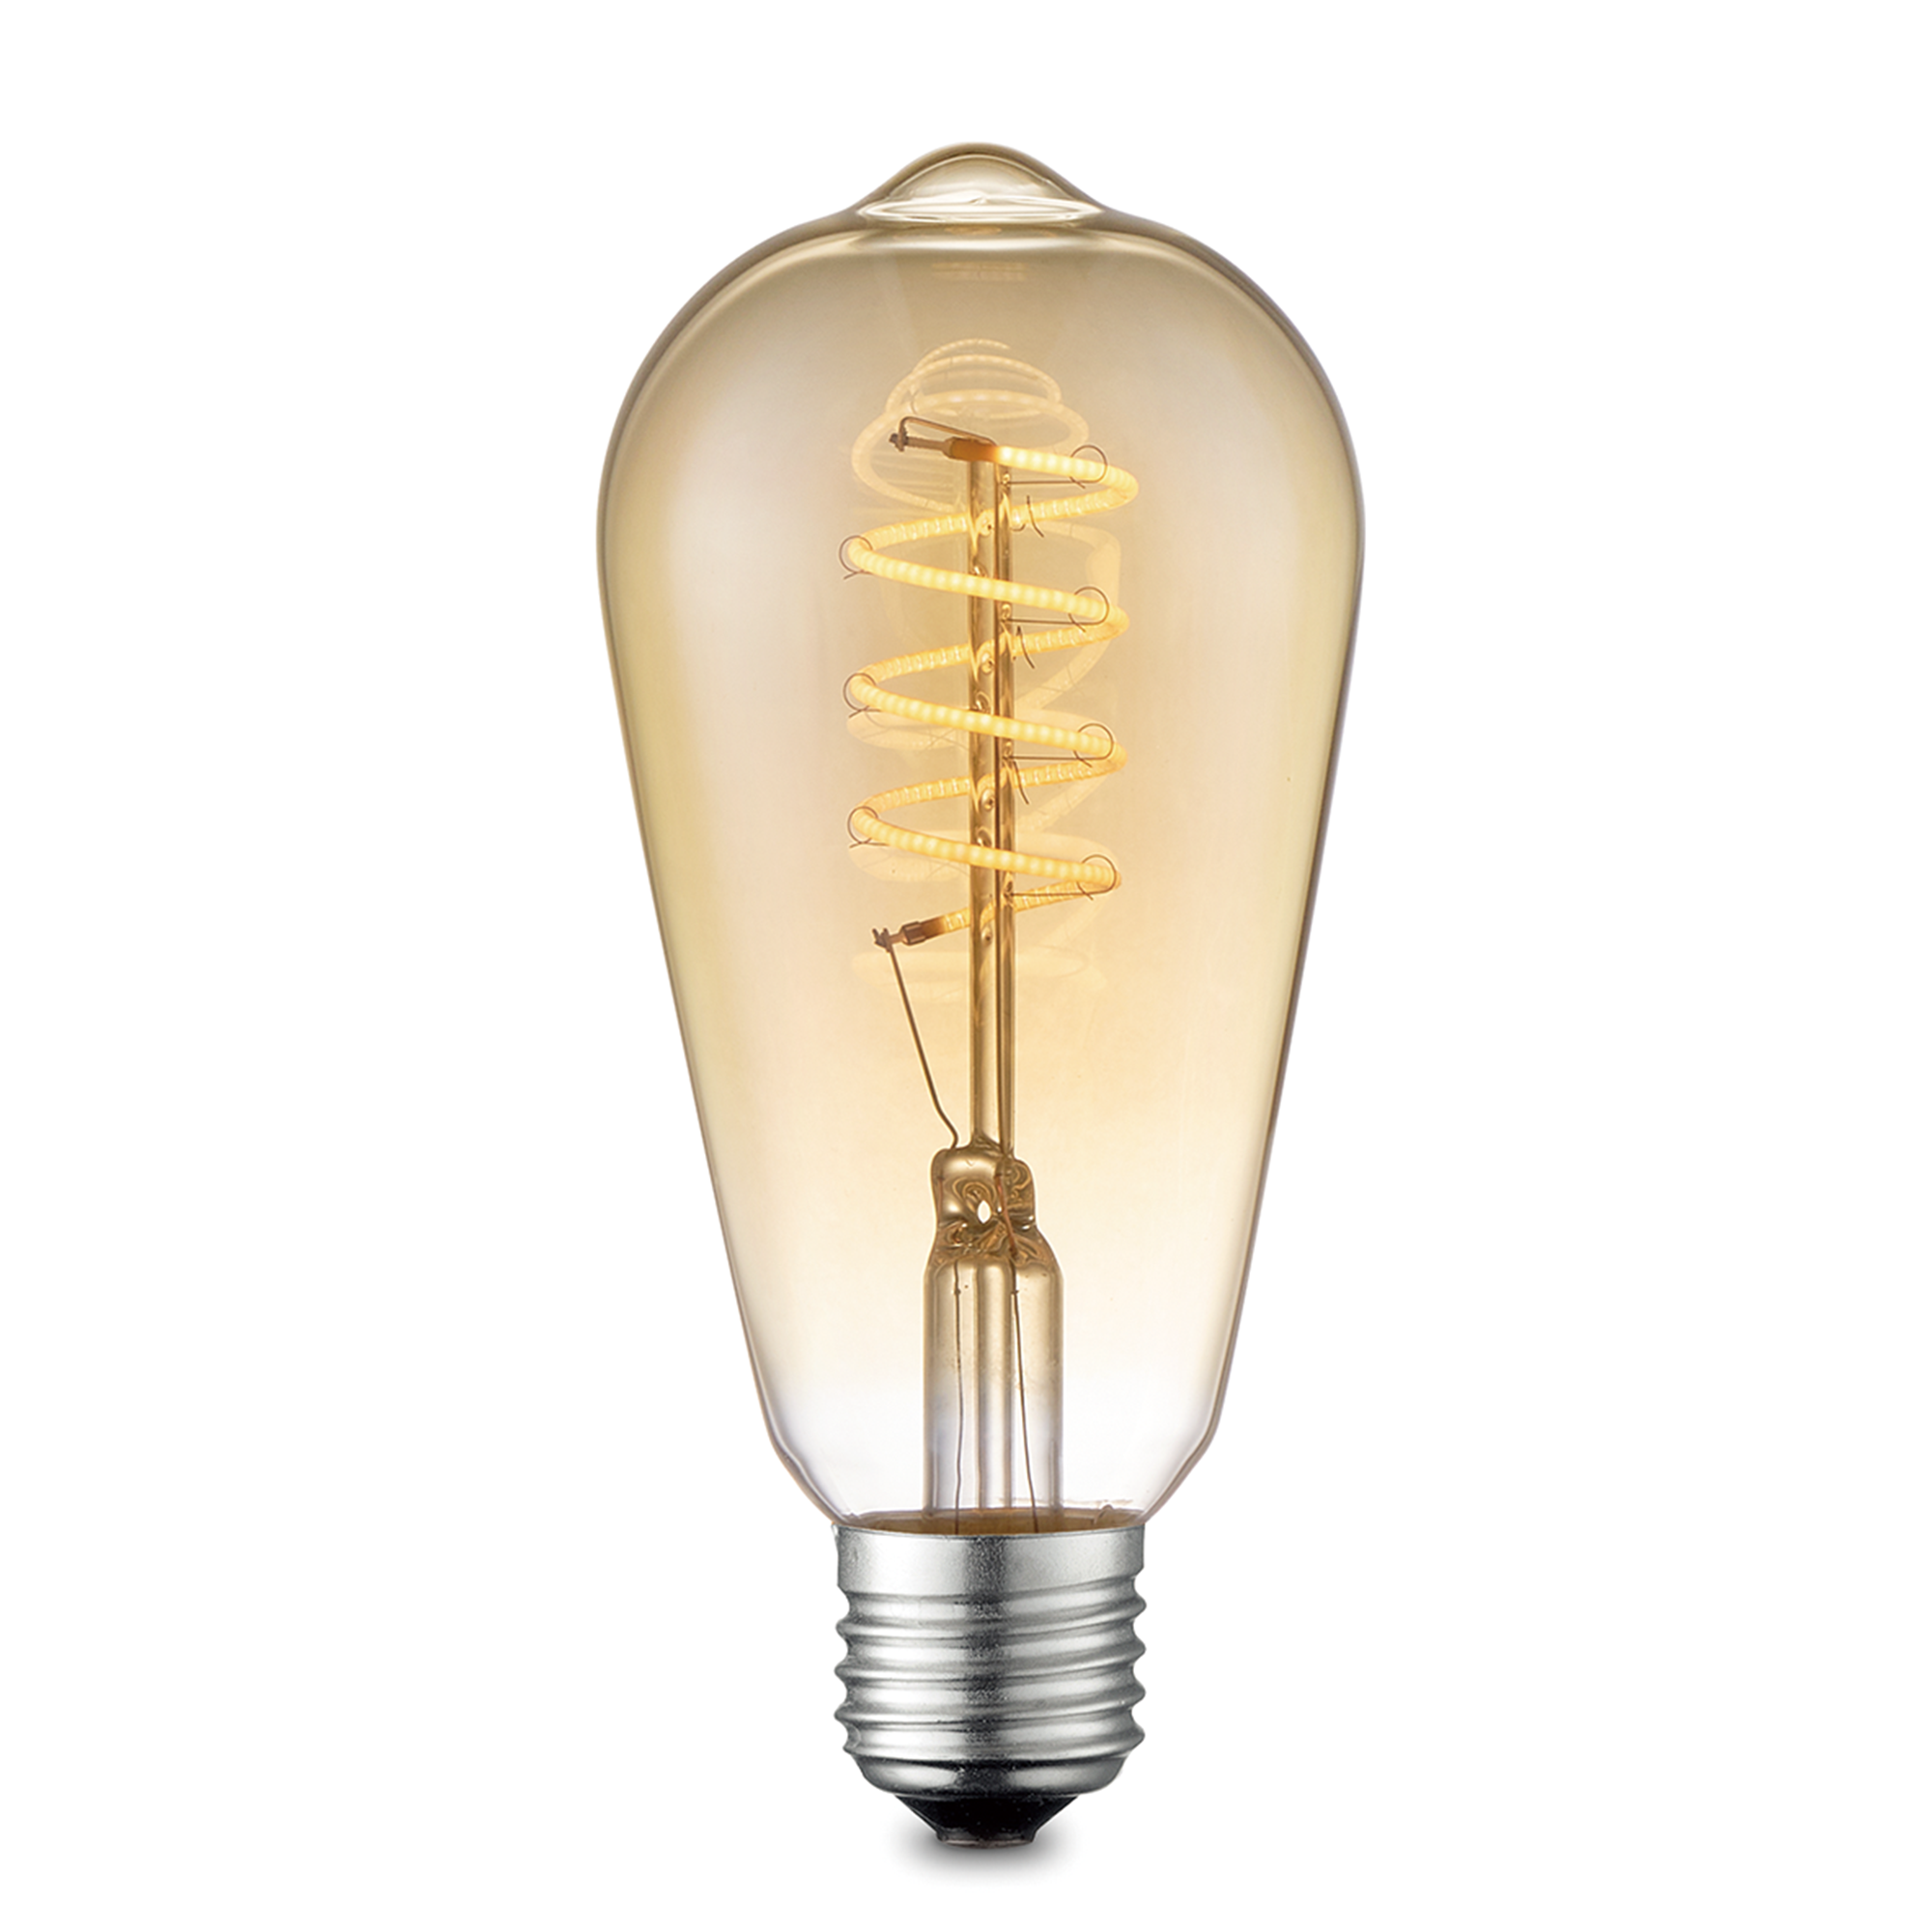 LED-Leuchtmittel 'Drop Spiral' amber E27 4W 240 lm dimmbar + product picture